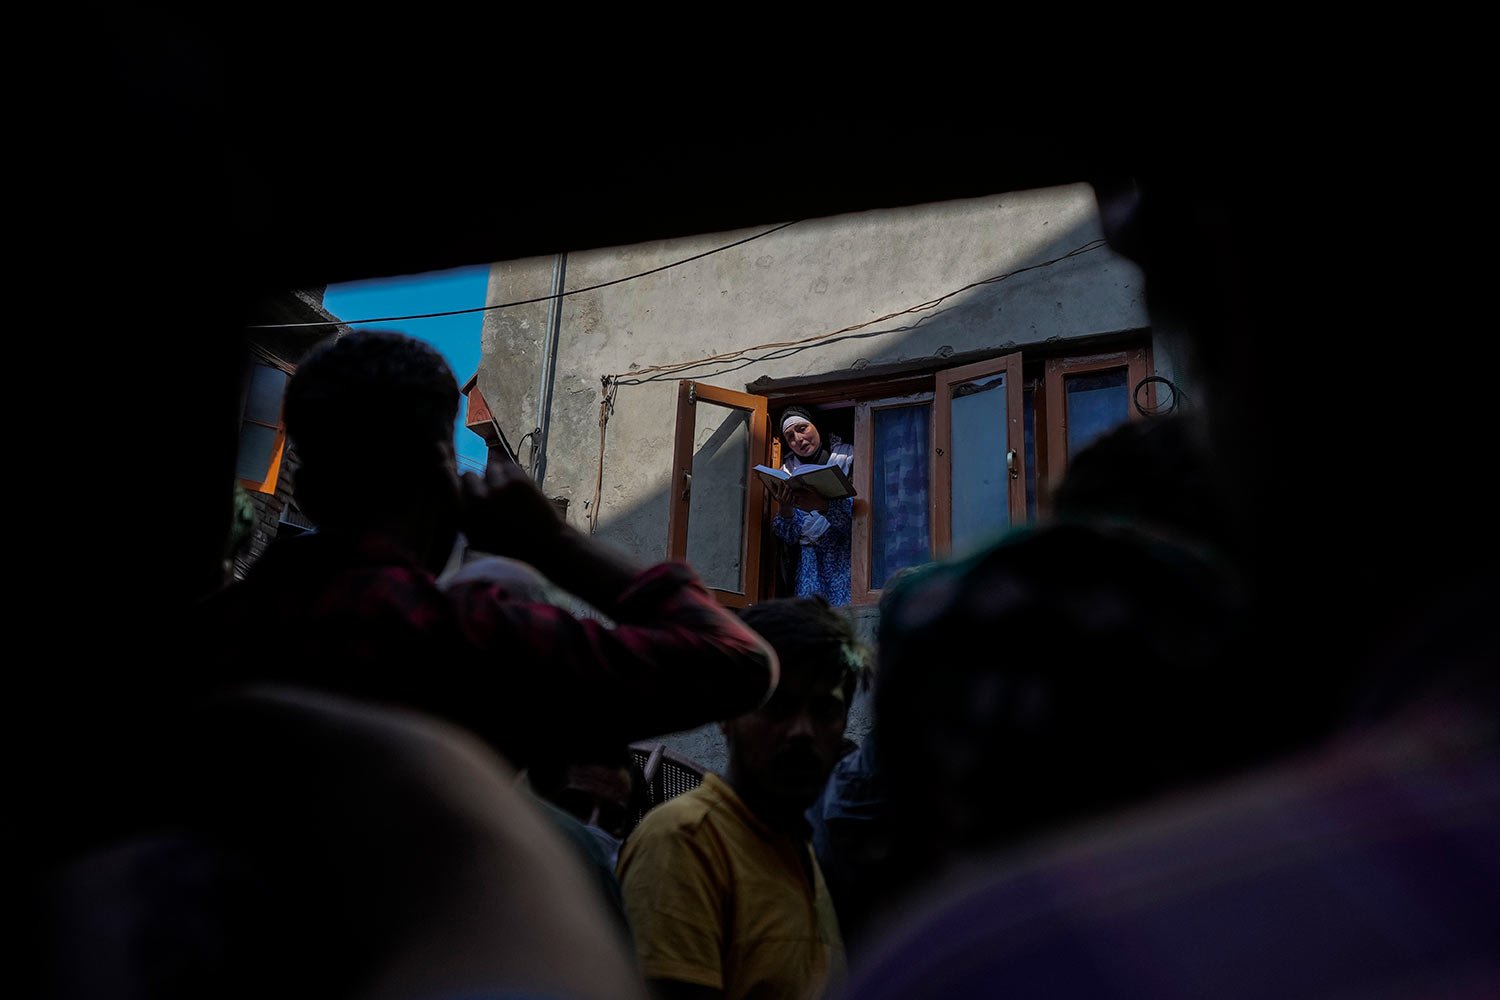  People watch as Abida Malik, sister of Kashmiri separatist leader Yasin Malik, reads verses from the Quran as she stands at the window of her house in Srinagar, Indian controlled Kashmir, Wednesday, May 25, 2022. (AP Photo/Mukhtar Khan) 